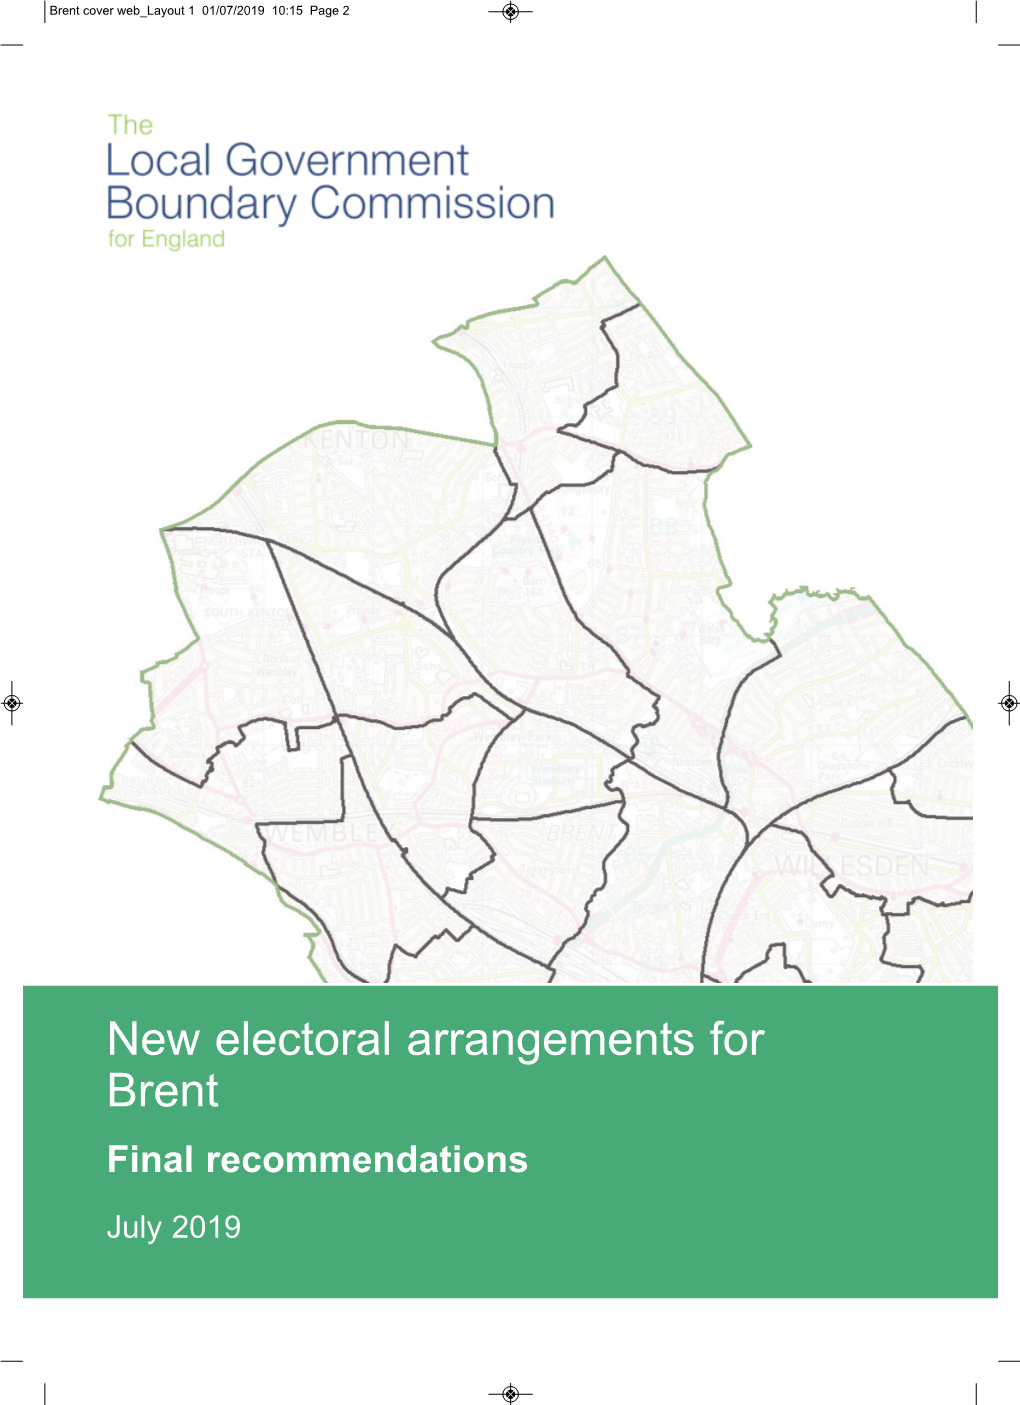 New Electoral Arrangements for Brent Final Recommendations July 2019 Brent Cover Web Layout 1 01/07/2019 10:15 Page 3